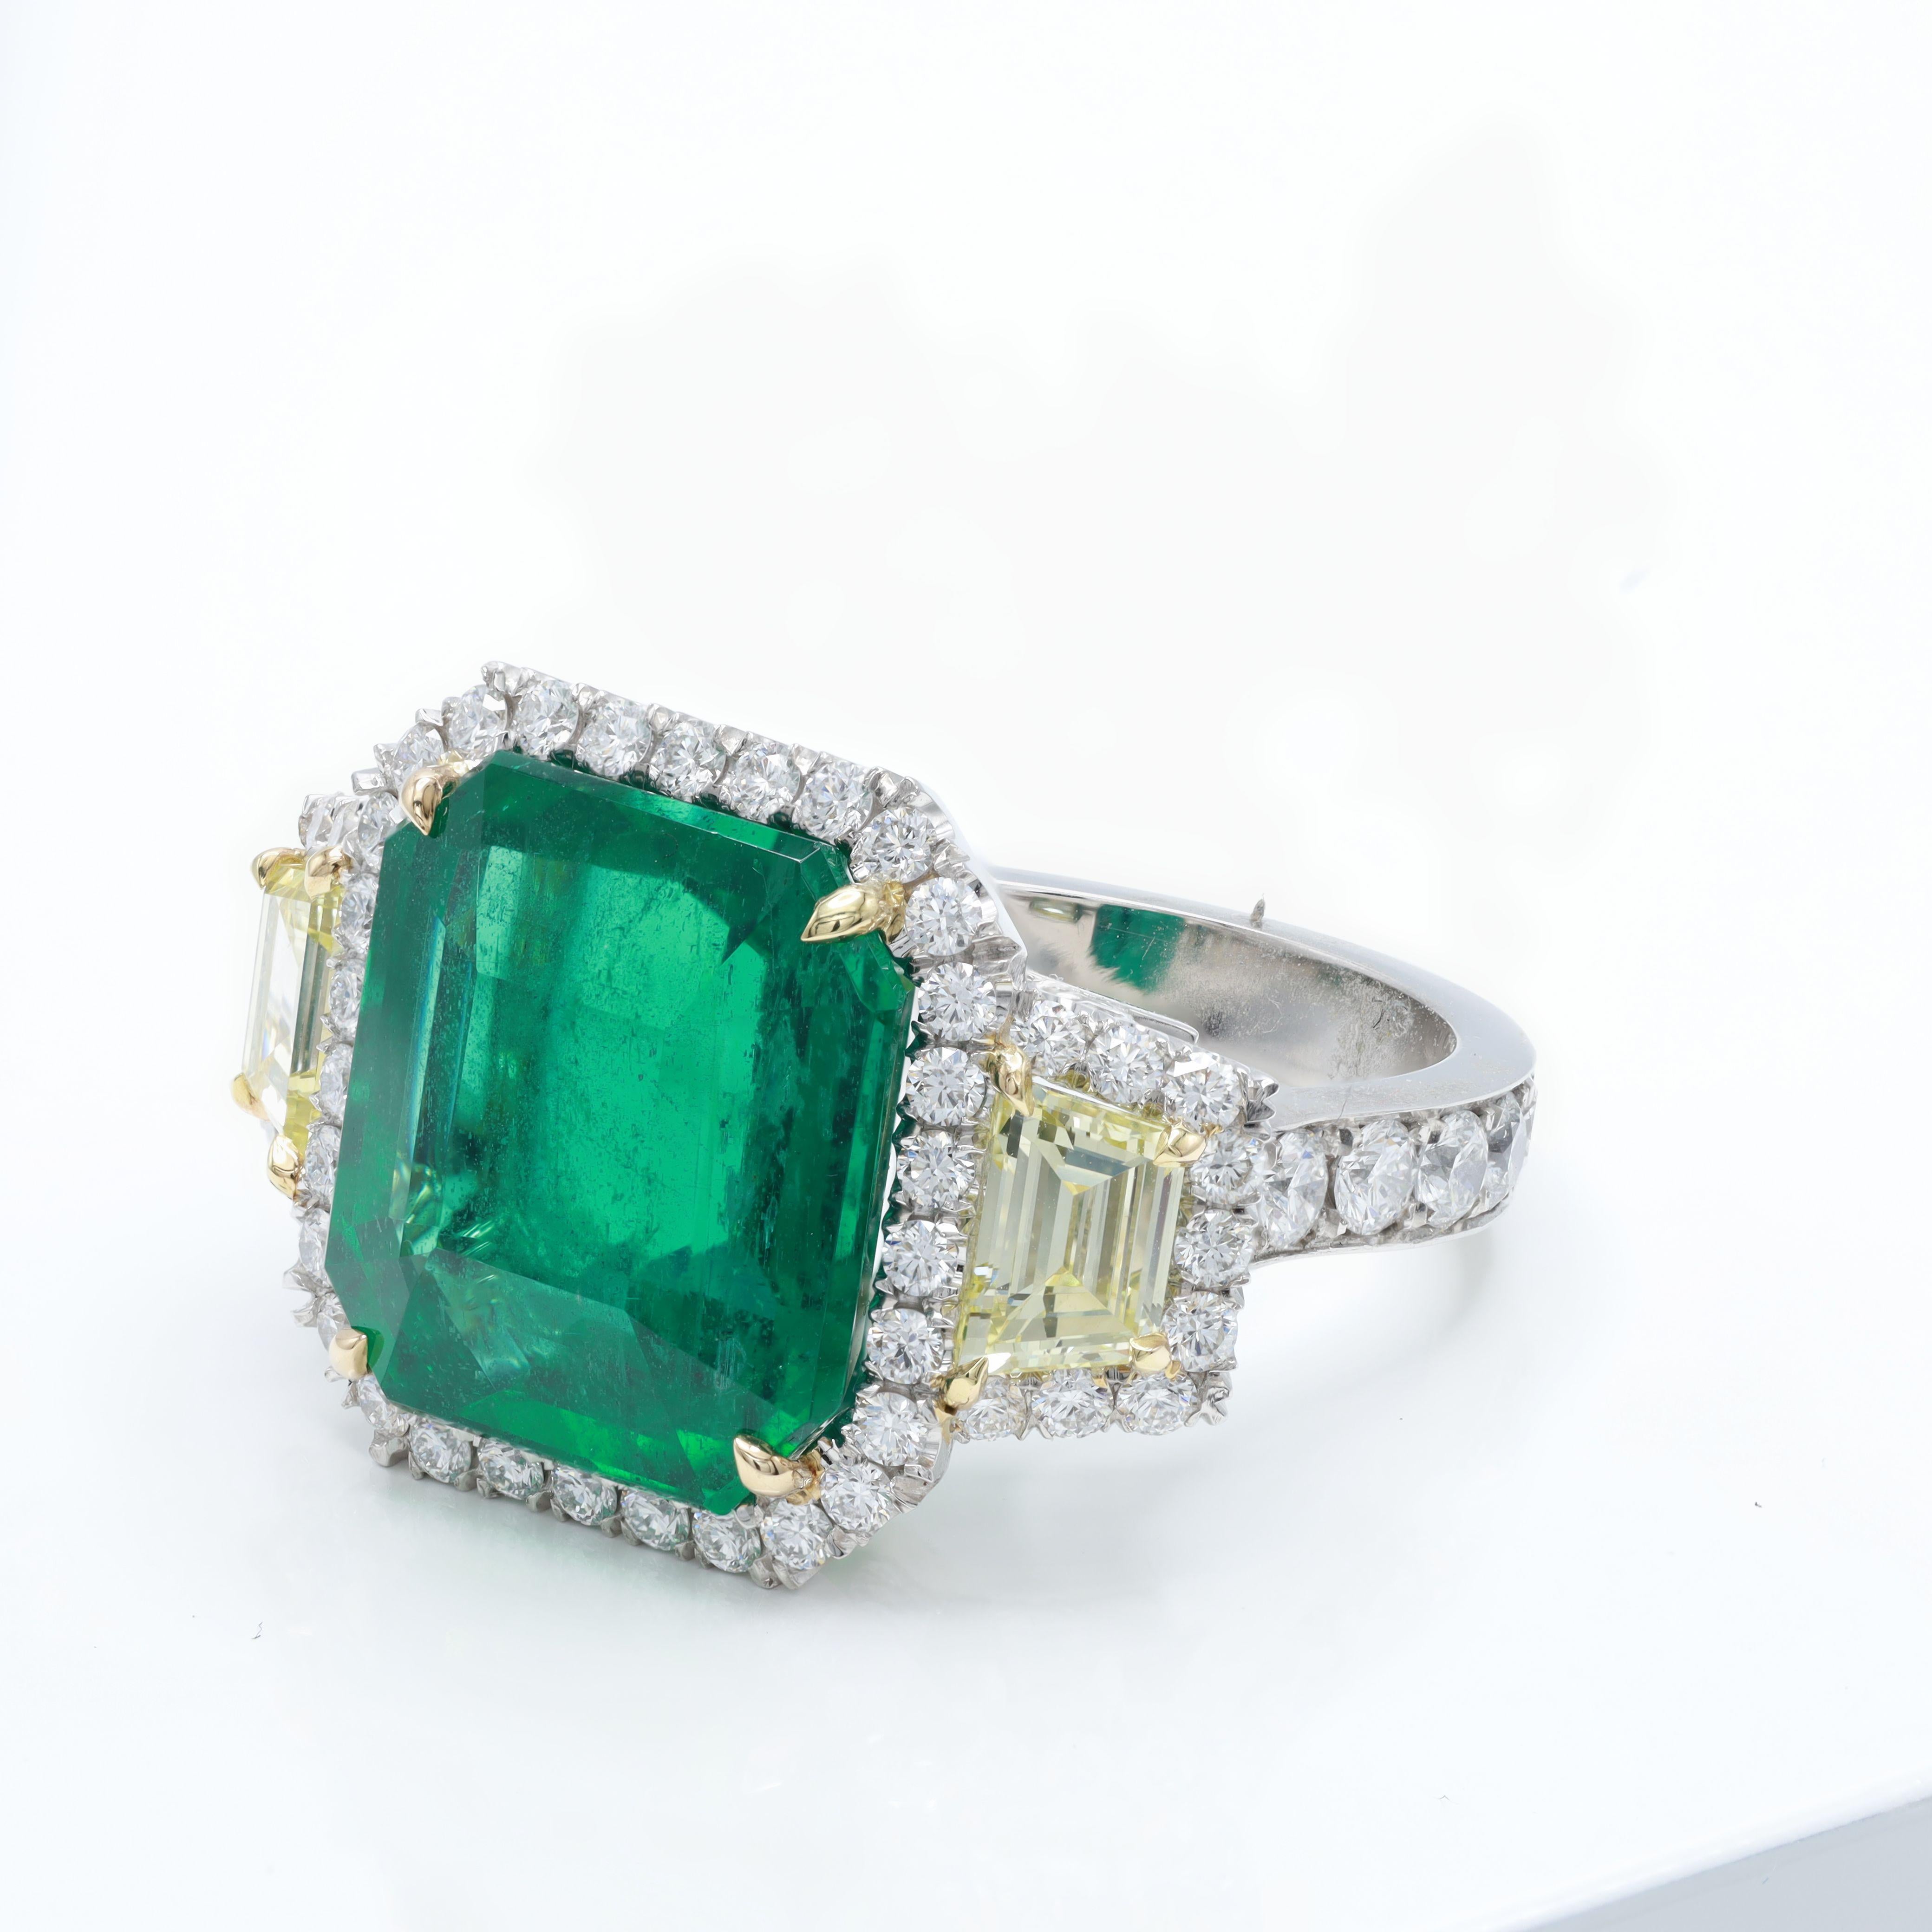 Platinum and 18 kt yellow gold emerald and diamond ring featuring a 10.13 ct green emerald alongside 2 step cut  trapezoids totaling 1.21 cts set in a halo setting totaling 1.65 cts